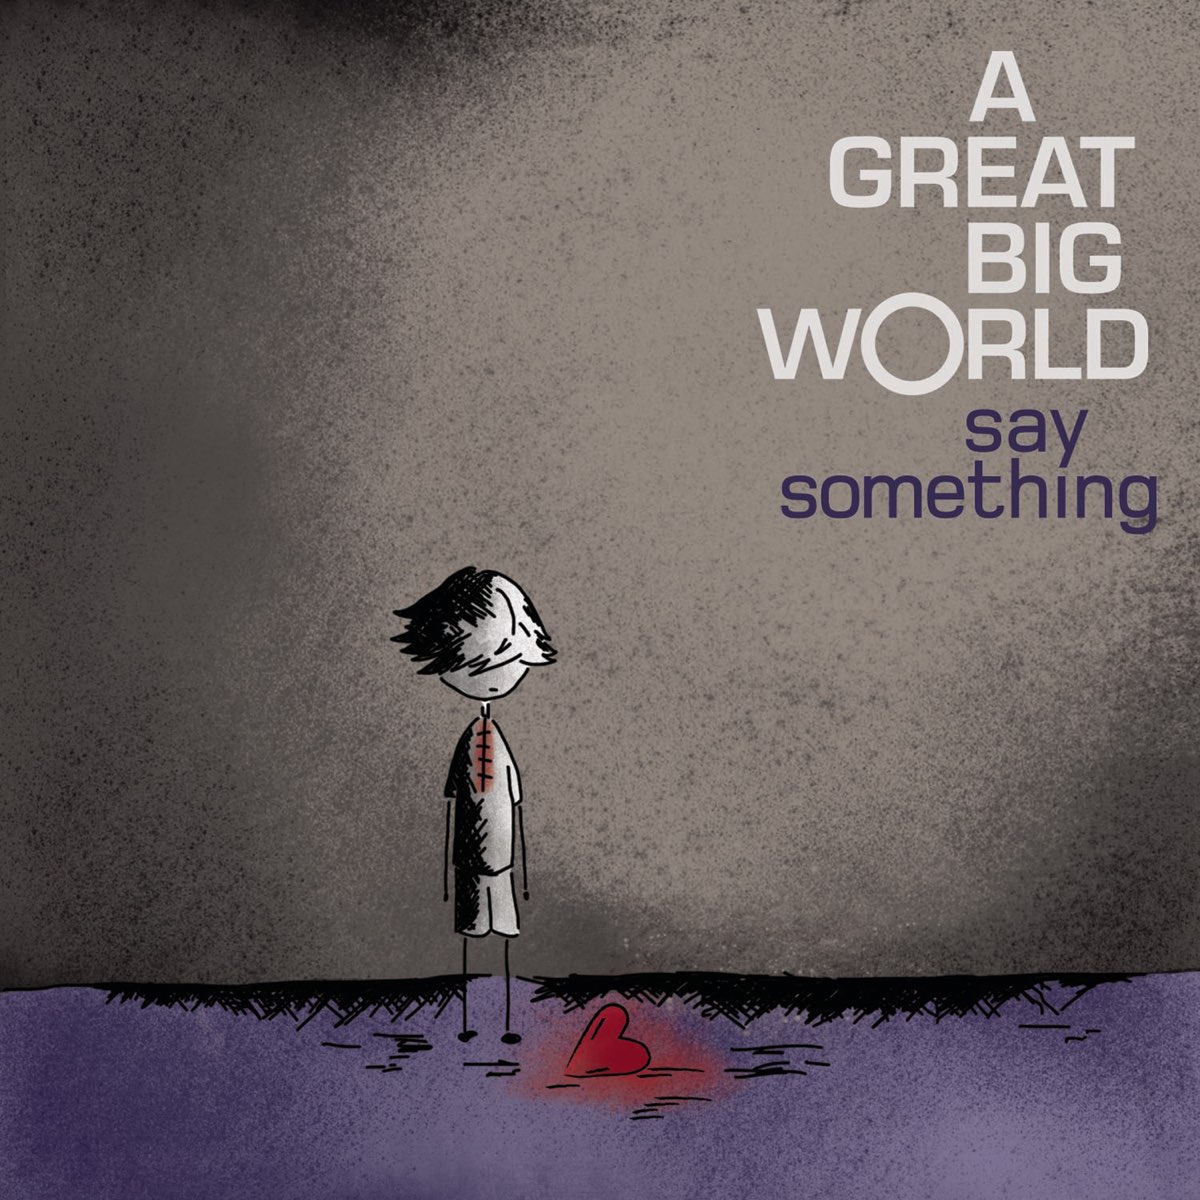 Say something a great big World. A great big World Christina Aguilera. Say something i'm giving. Can i say something